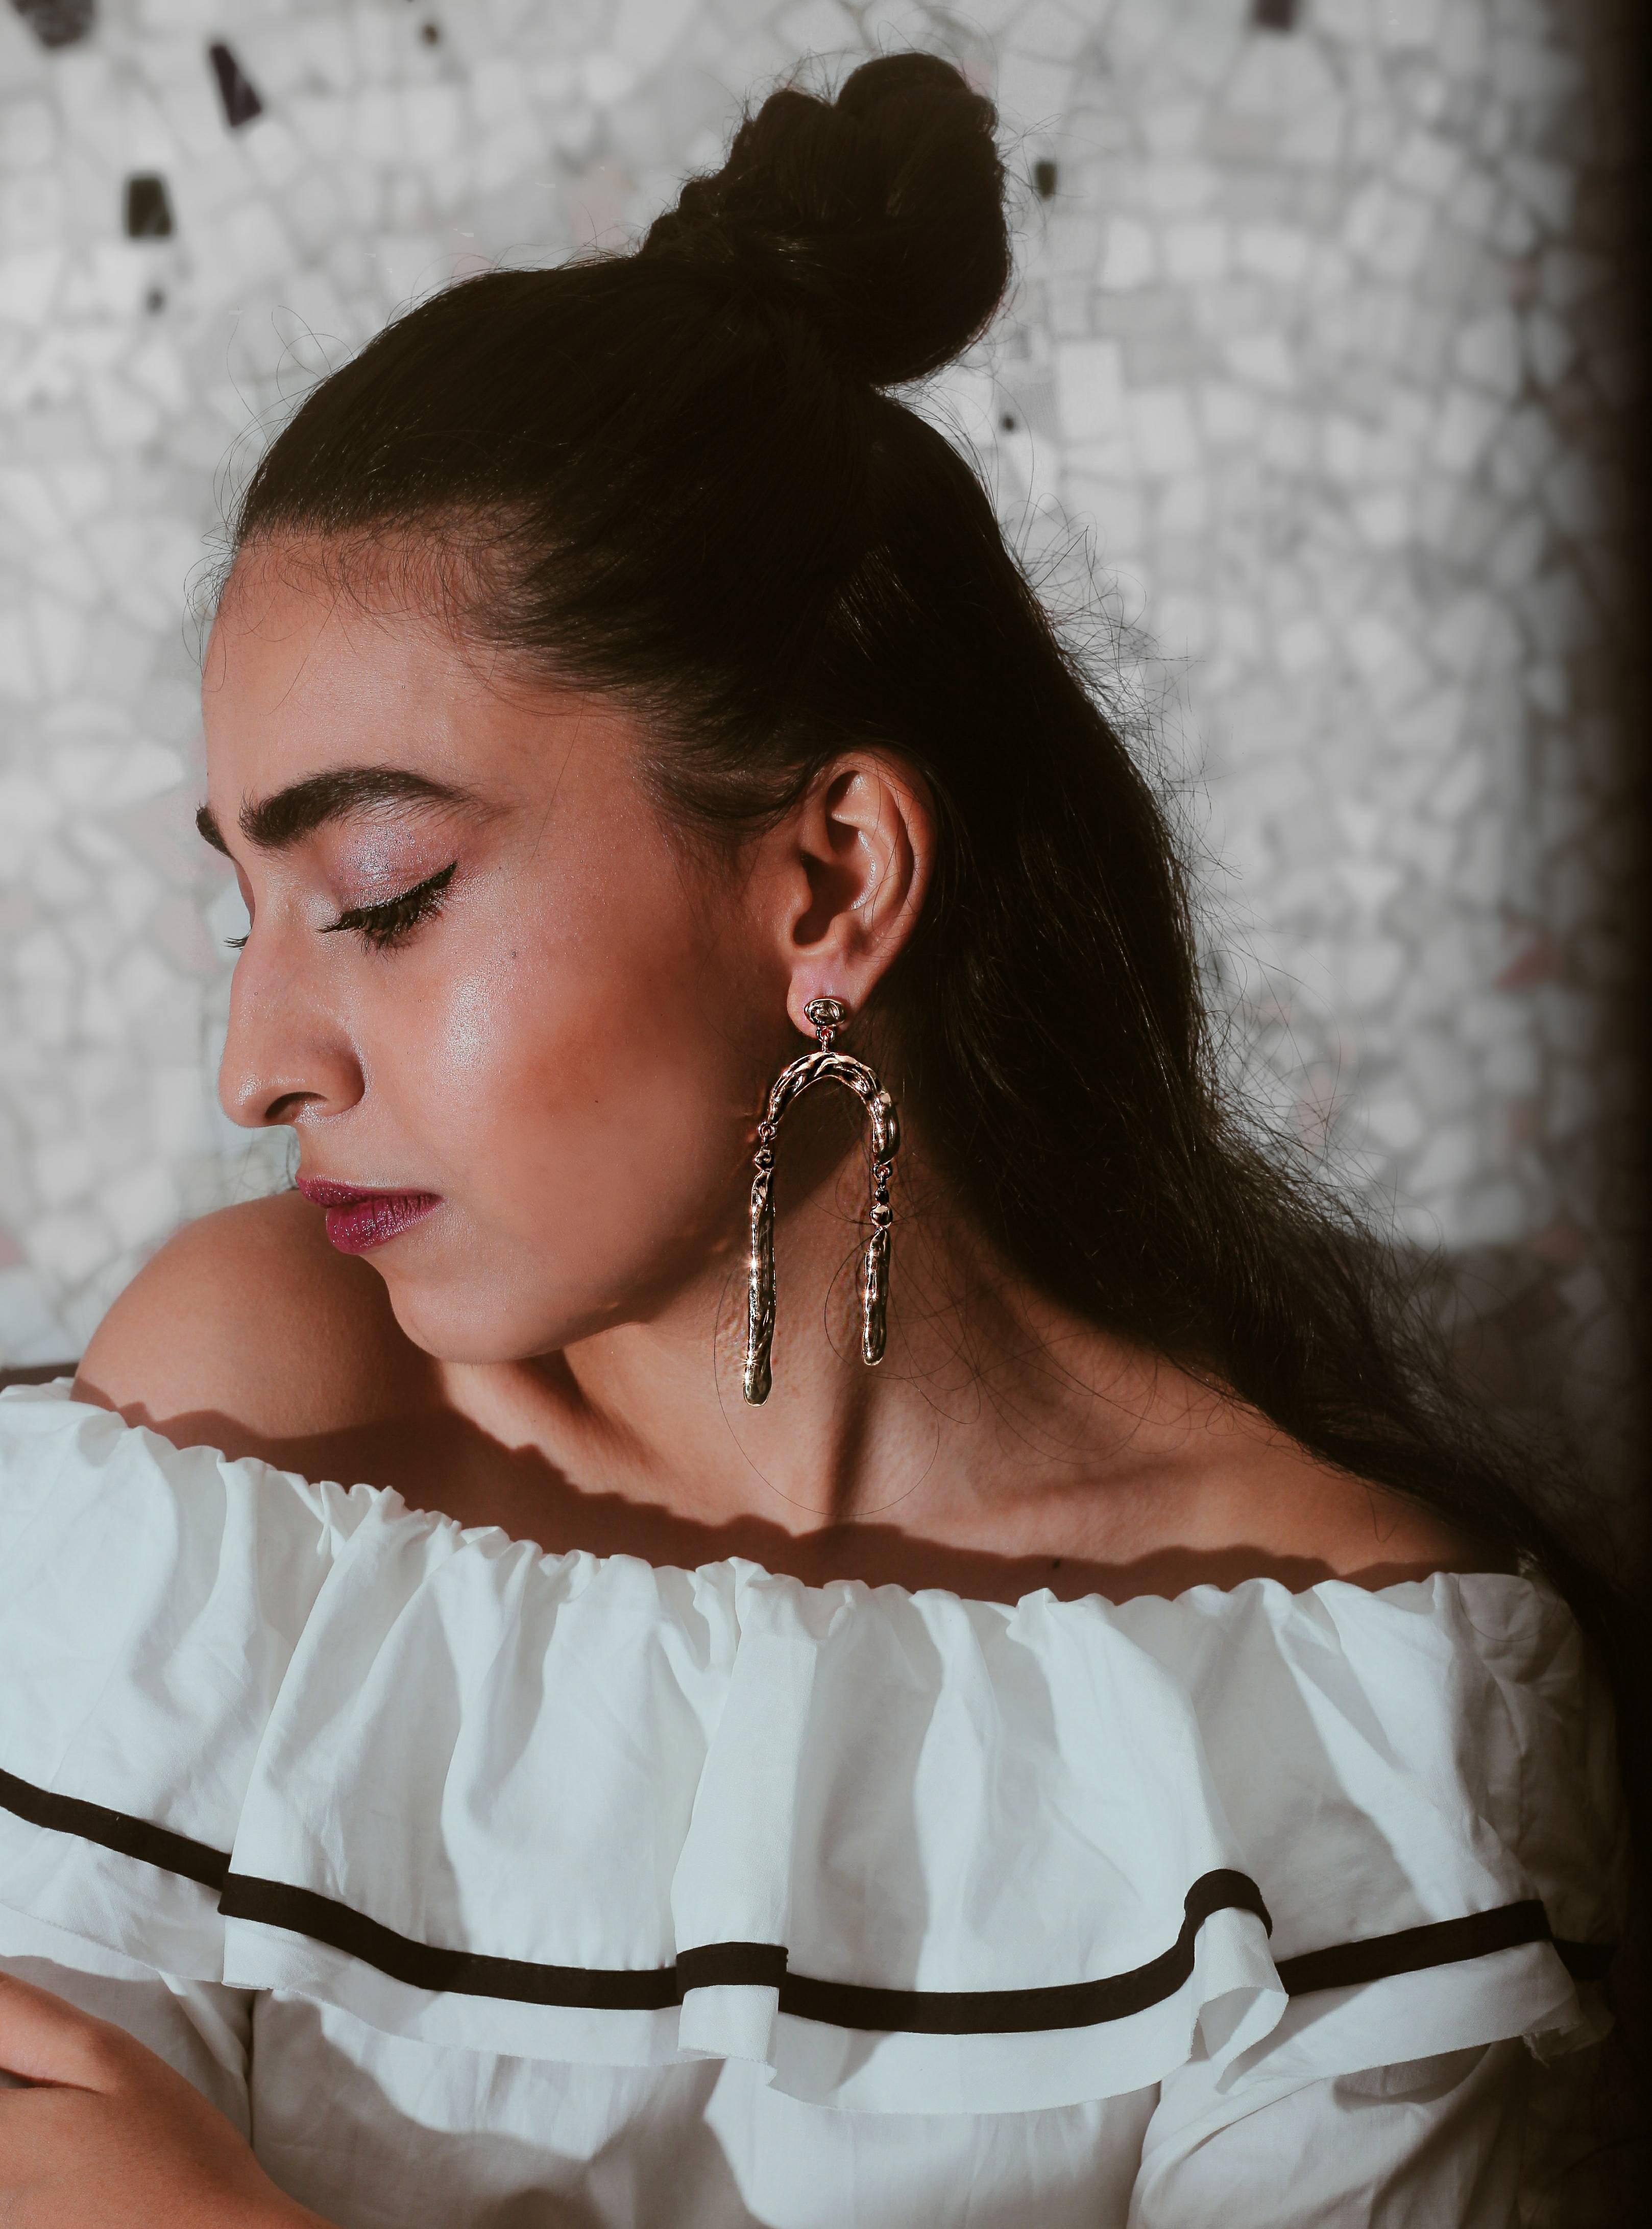 Earrings, jewelry, accessories, statement piece, statement jewelry, jewellery, makeup, editorial shoot, contouring, gold jewelry, minimal, miss match earrings